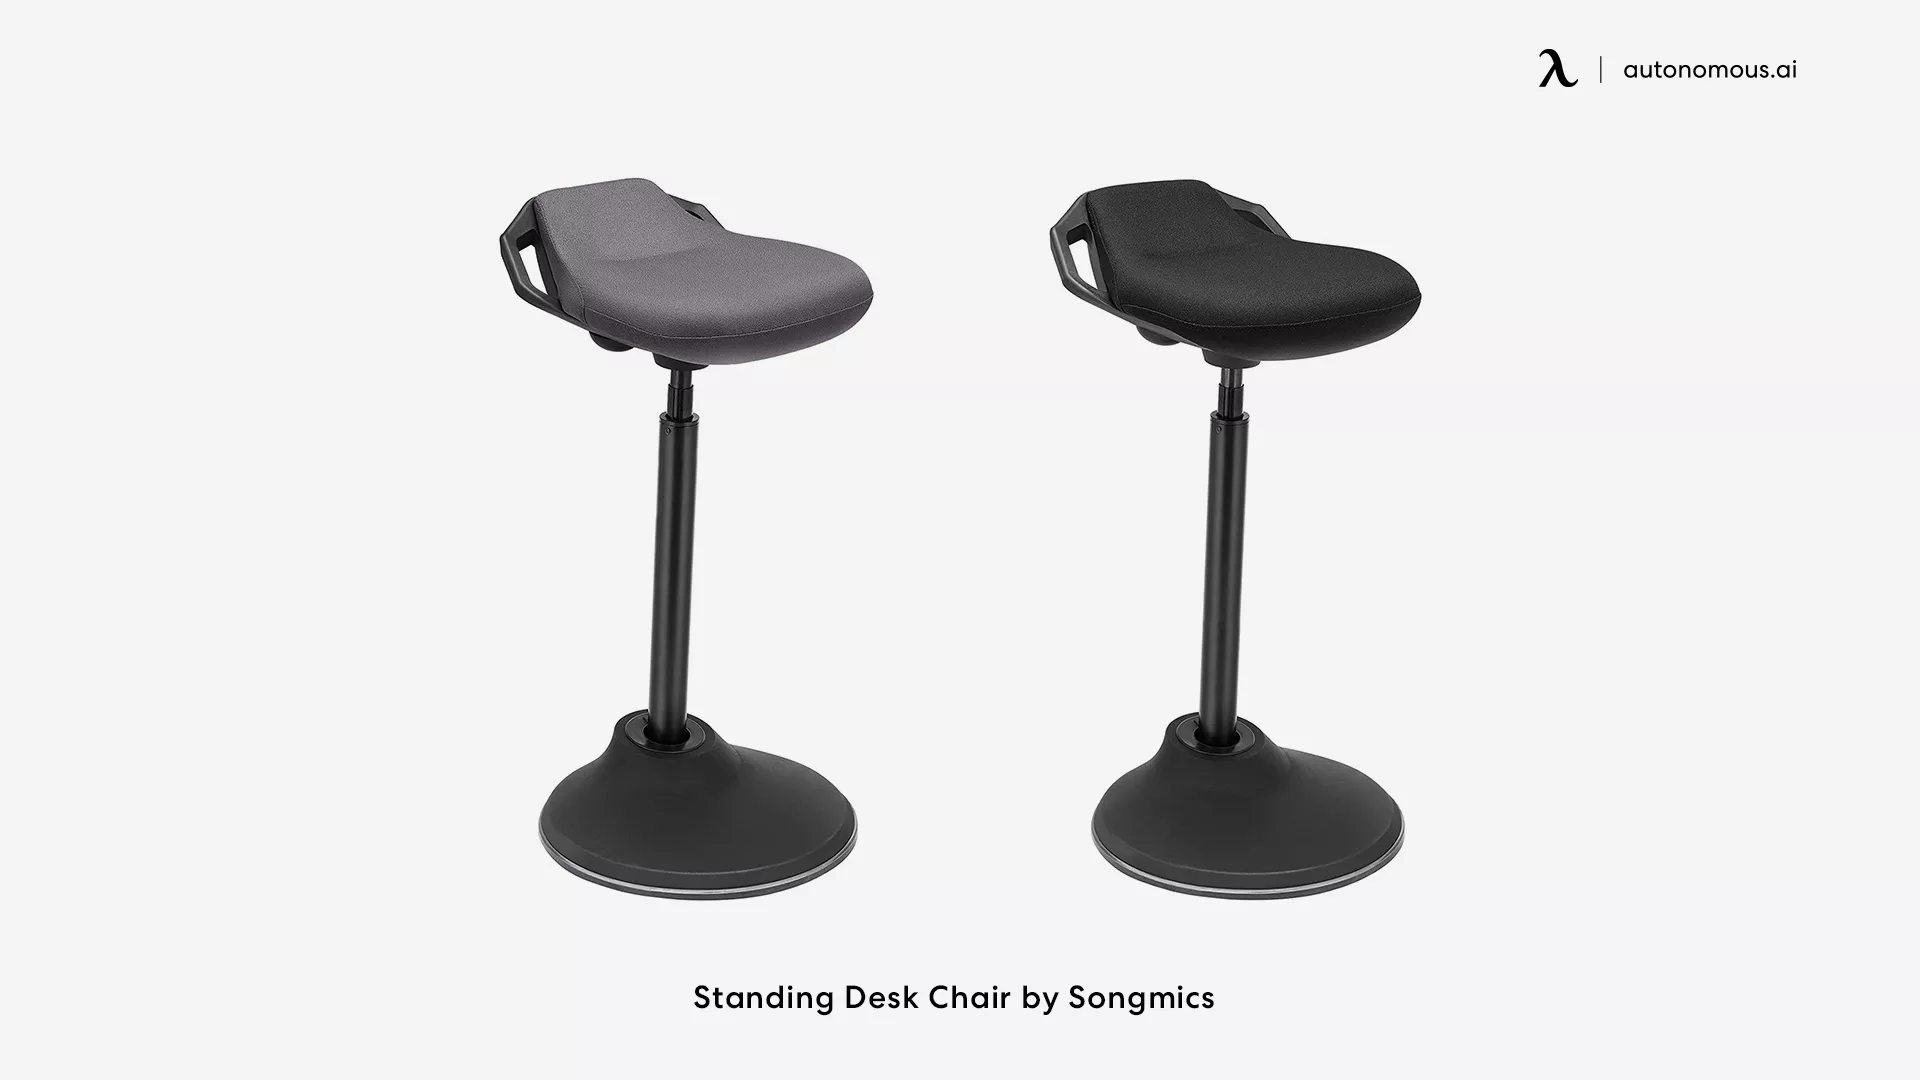 Standing comfortable office chair by Songmics